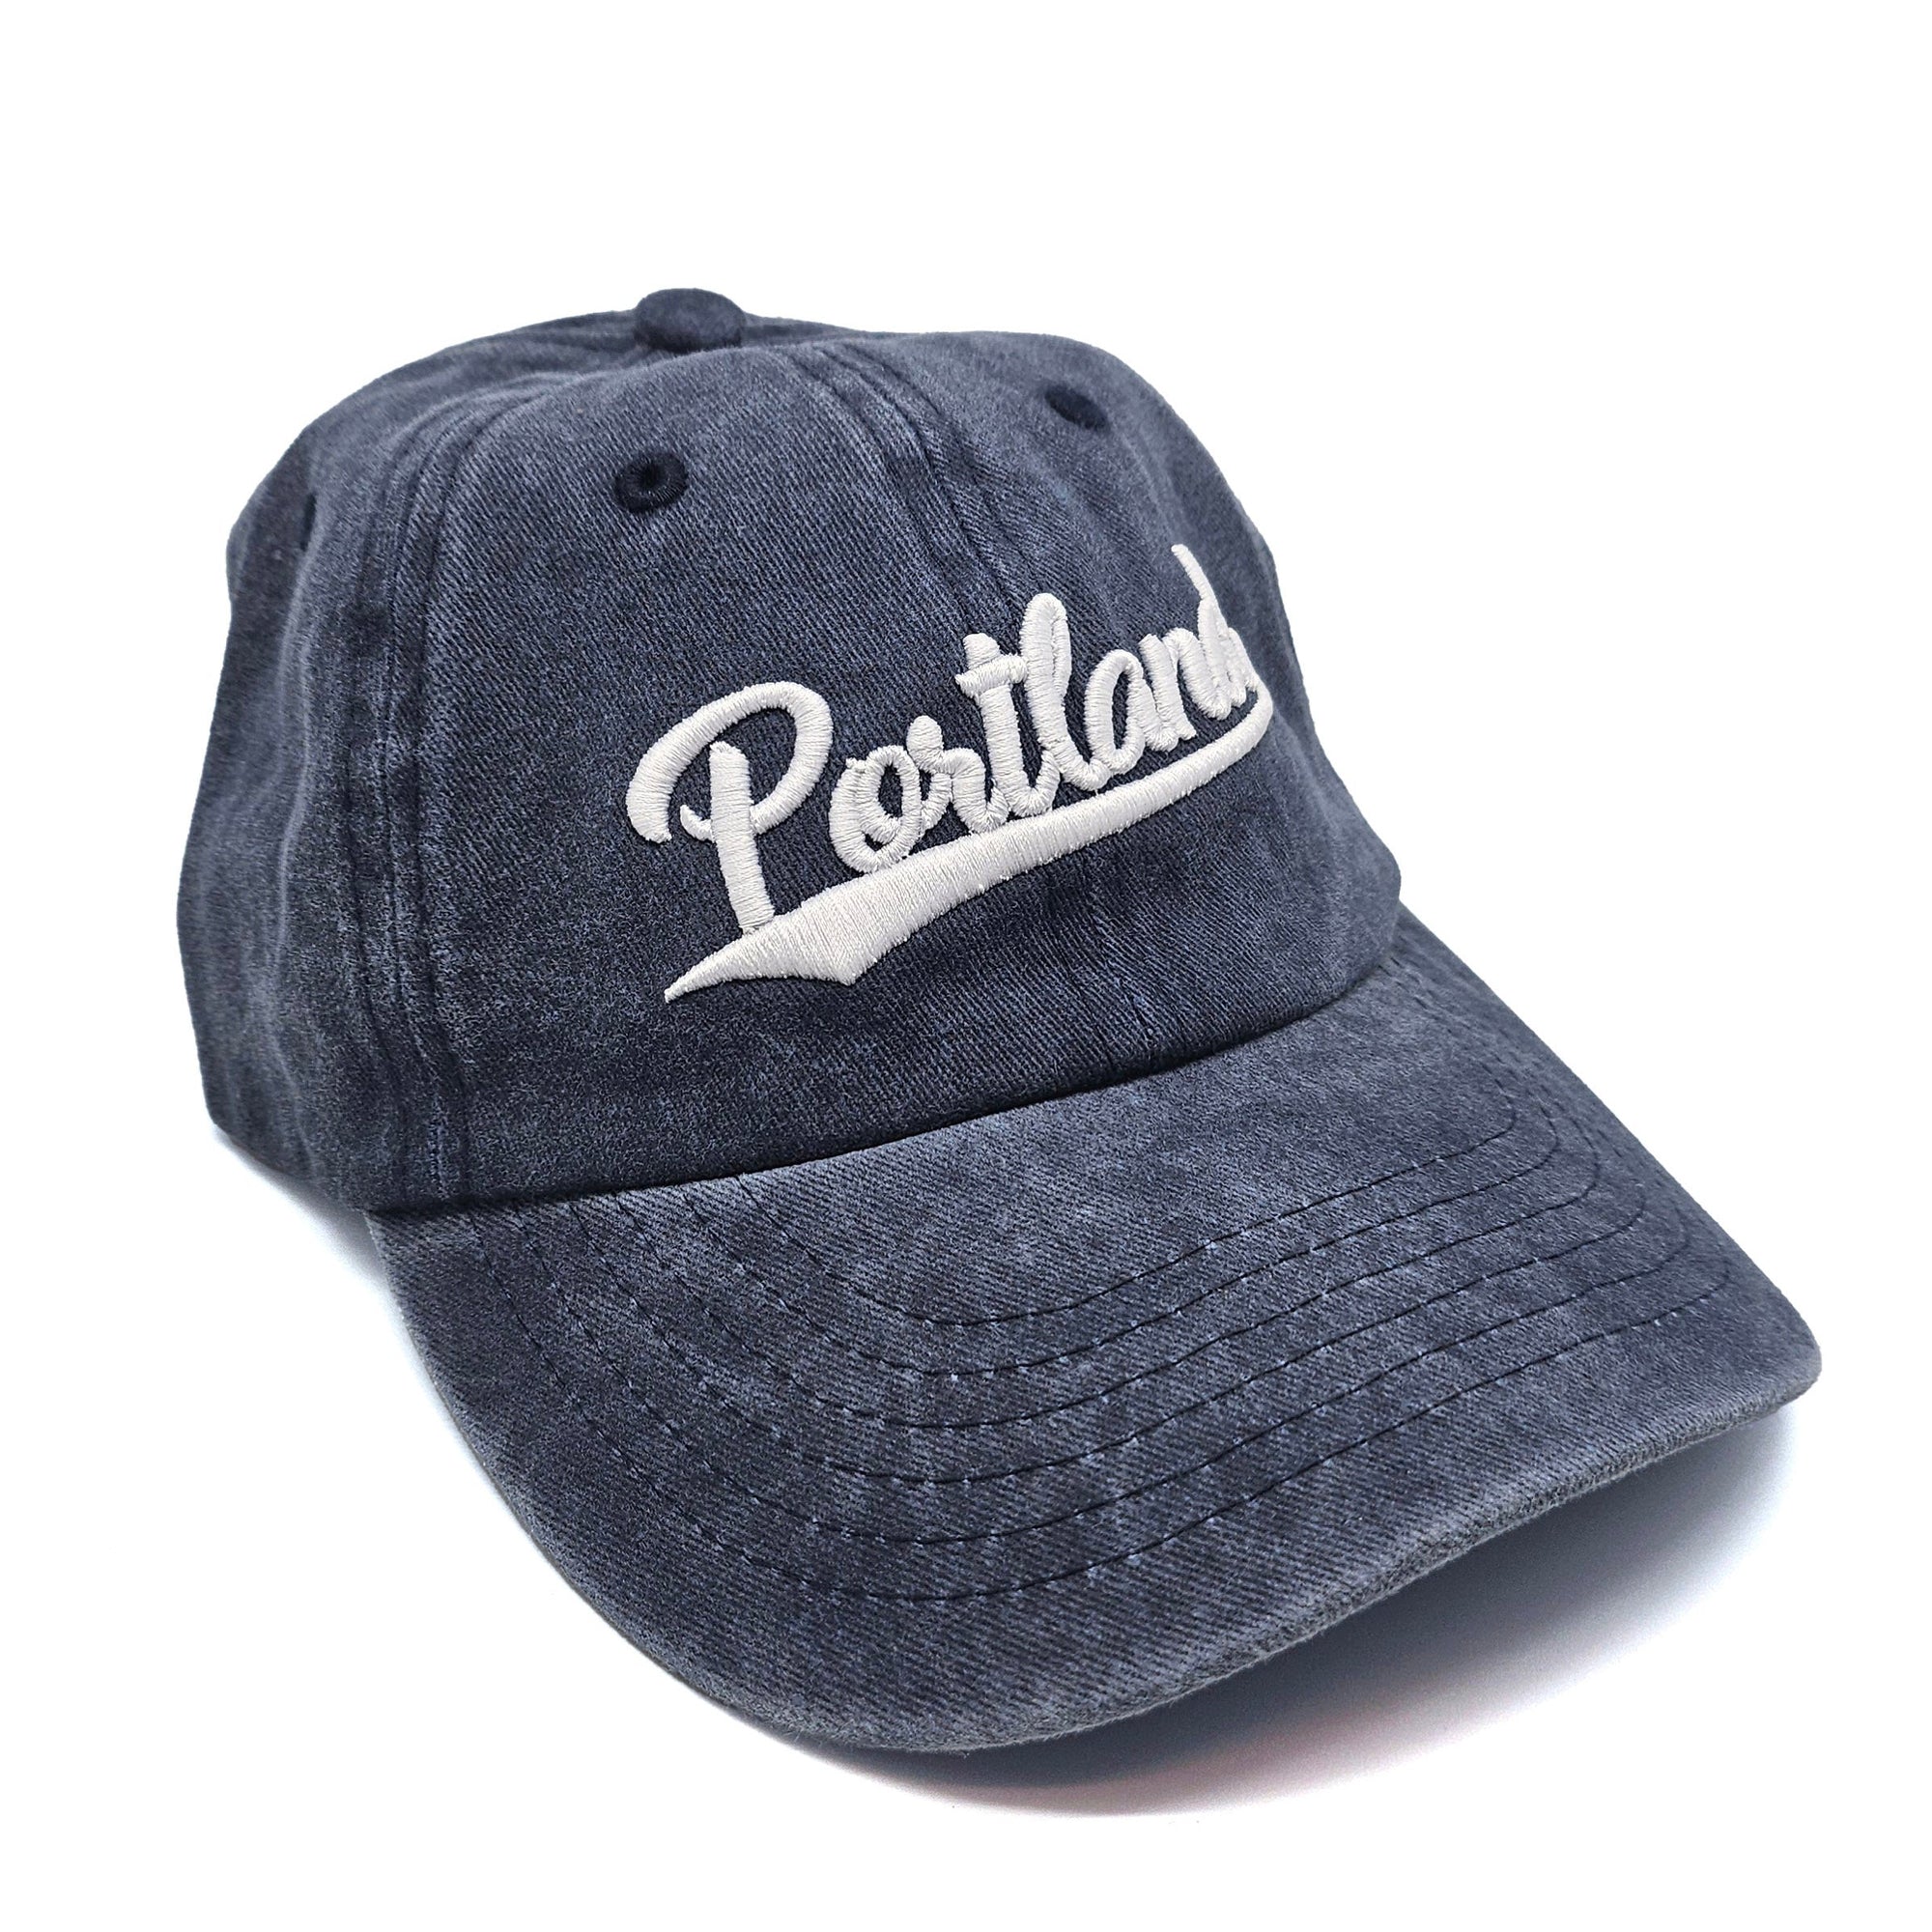 Pigment Washed Portland Dad Hat - Hats - Hello From Portland